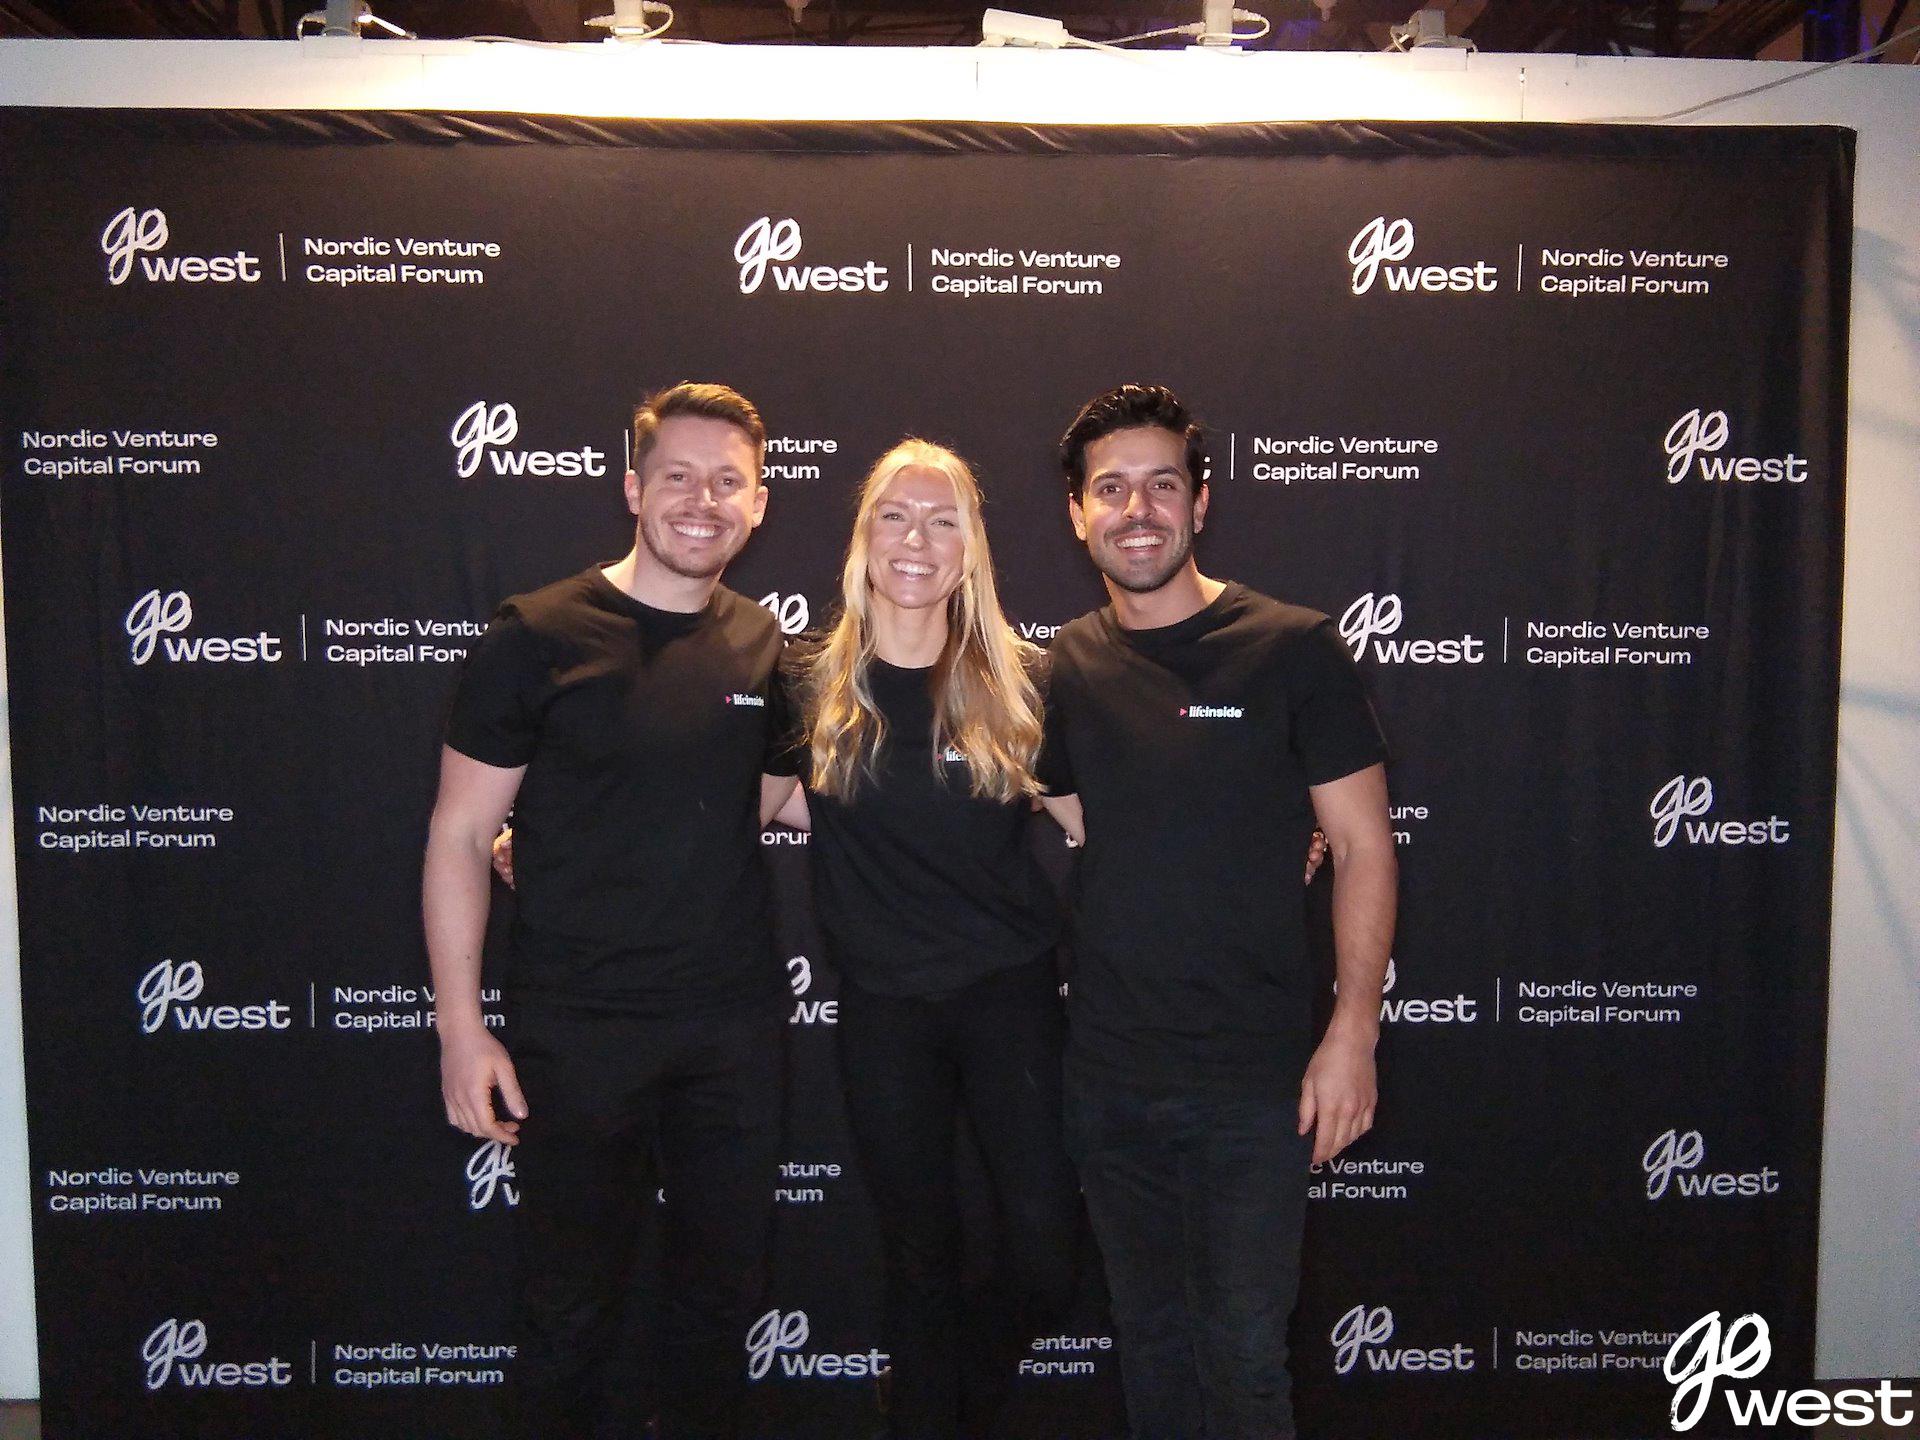 Niklas Busck, Julia Sjövall and Poyan Karimi standing in front of the Go West photo wall